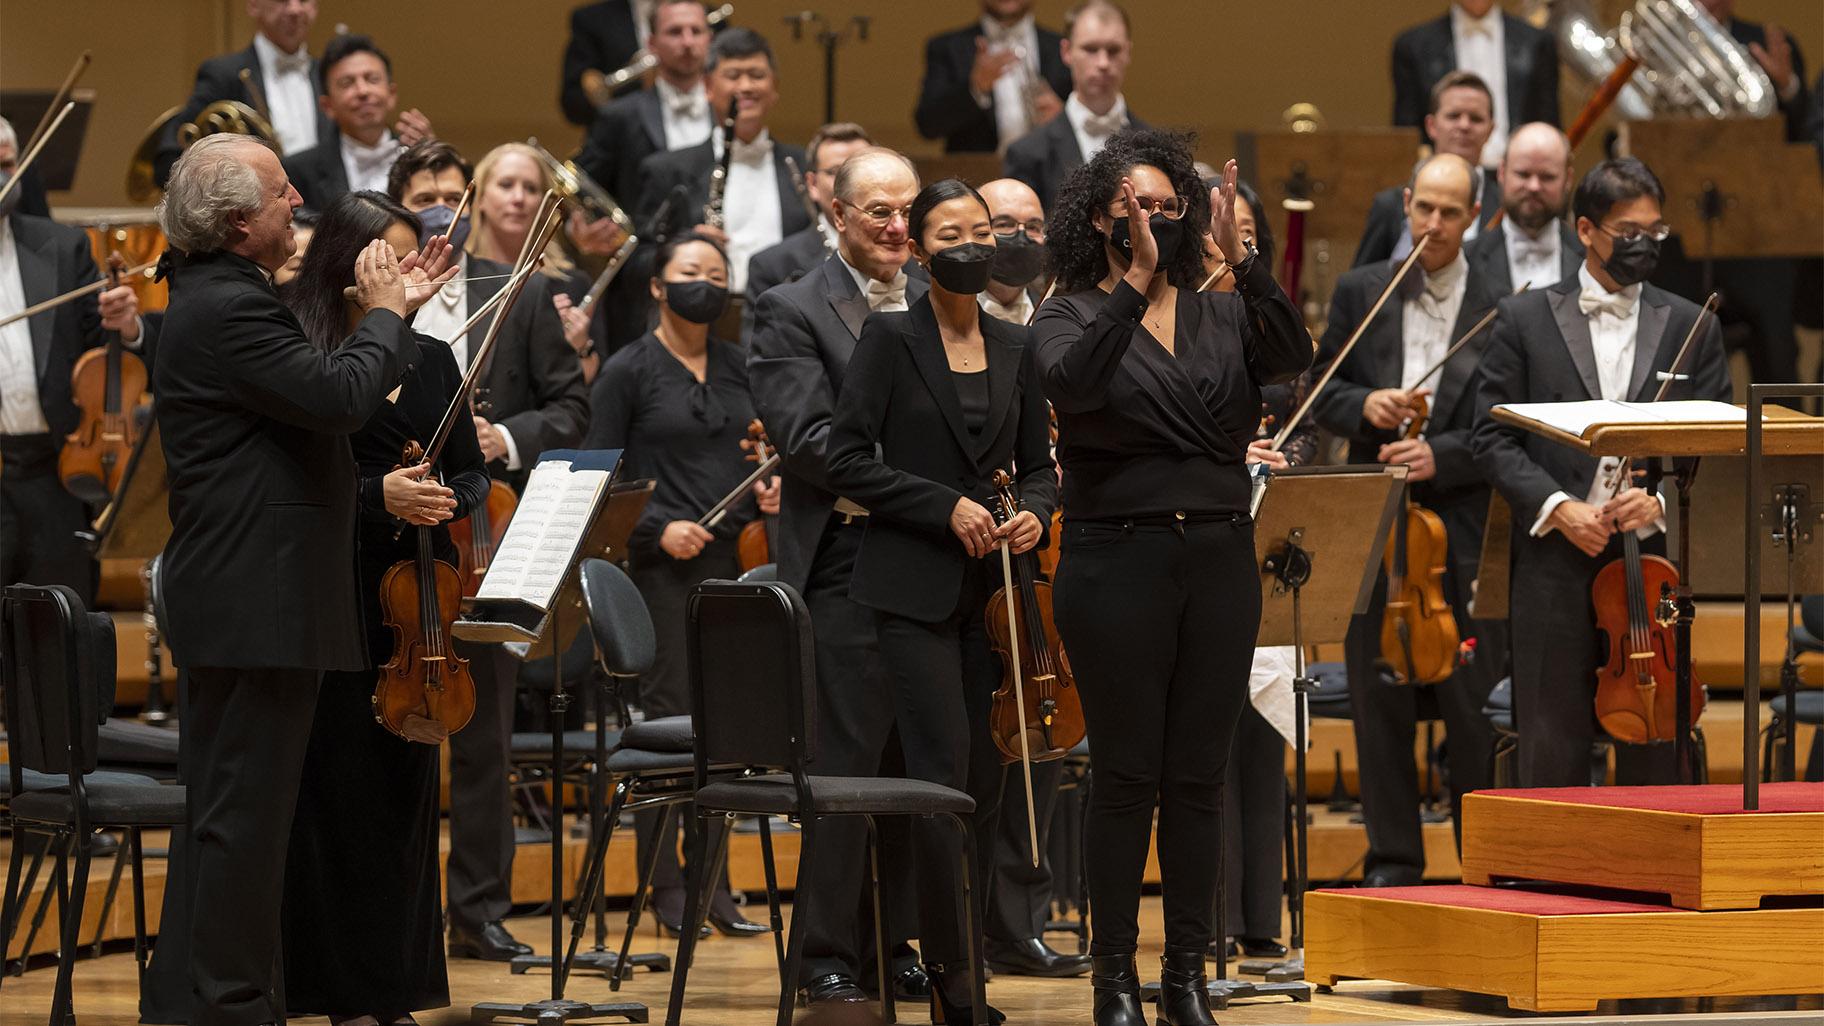 Mead Composer-in-Residence Jessie Montgomery acknowledges the audience following a performance of “Coincident Dances” with the Chicago Symphony Orchestra, Oct. 28, 2021. (Todd Rosenberg Photography)